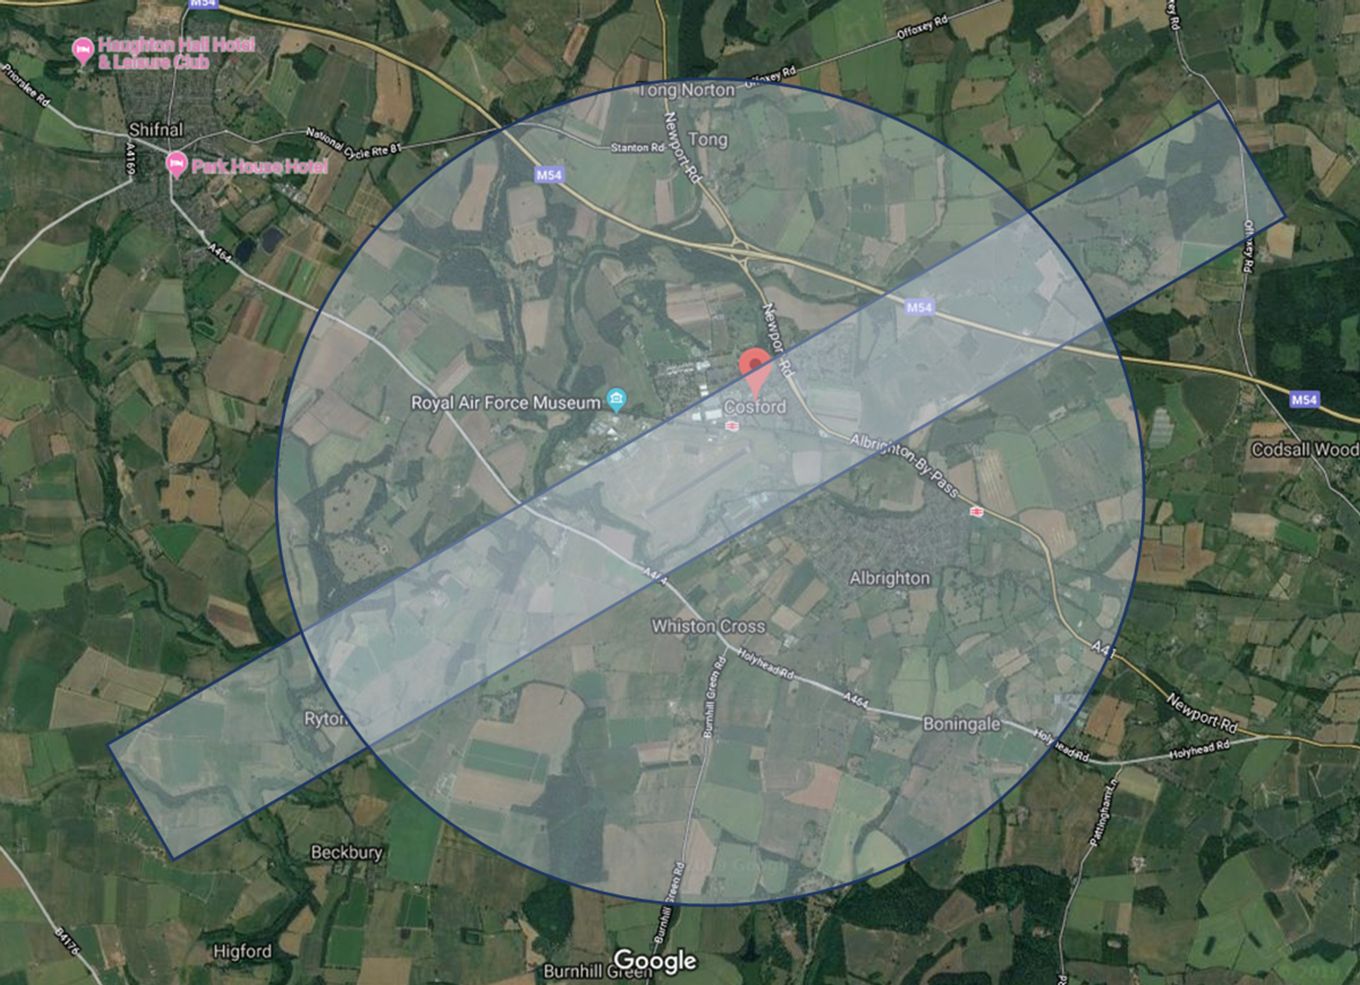 Image shows a geographical Google maps view of Cosford and the radar zone within which drones can legally fly,